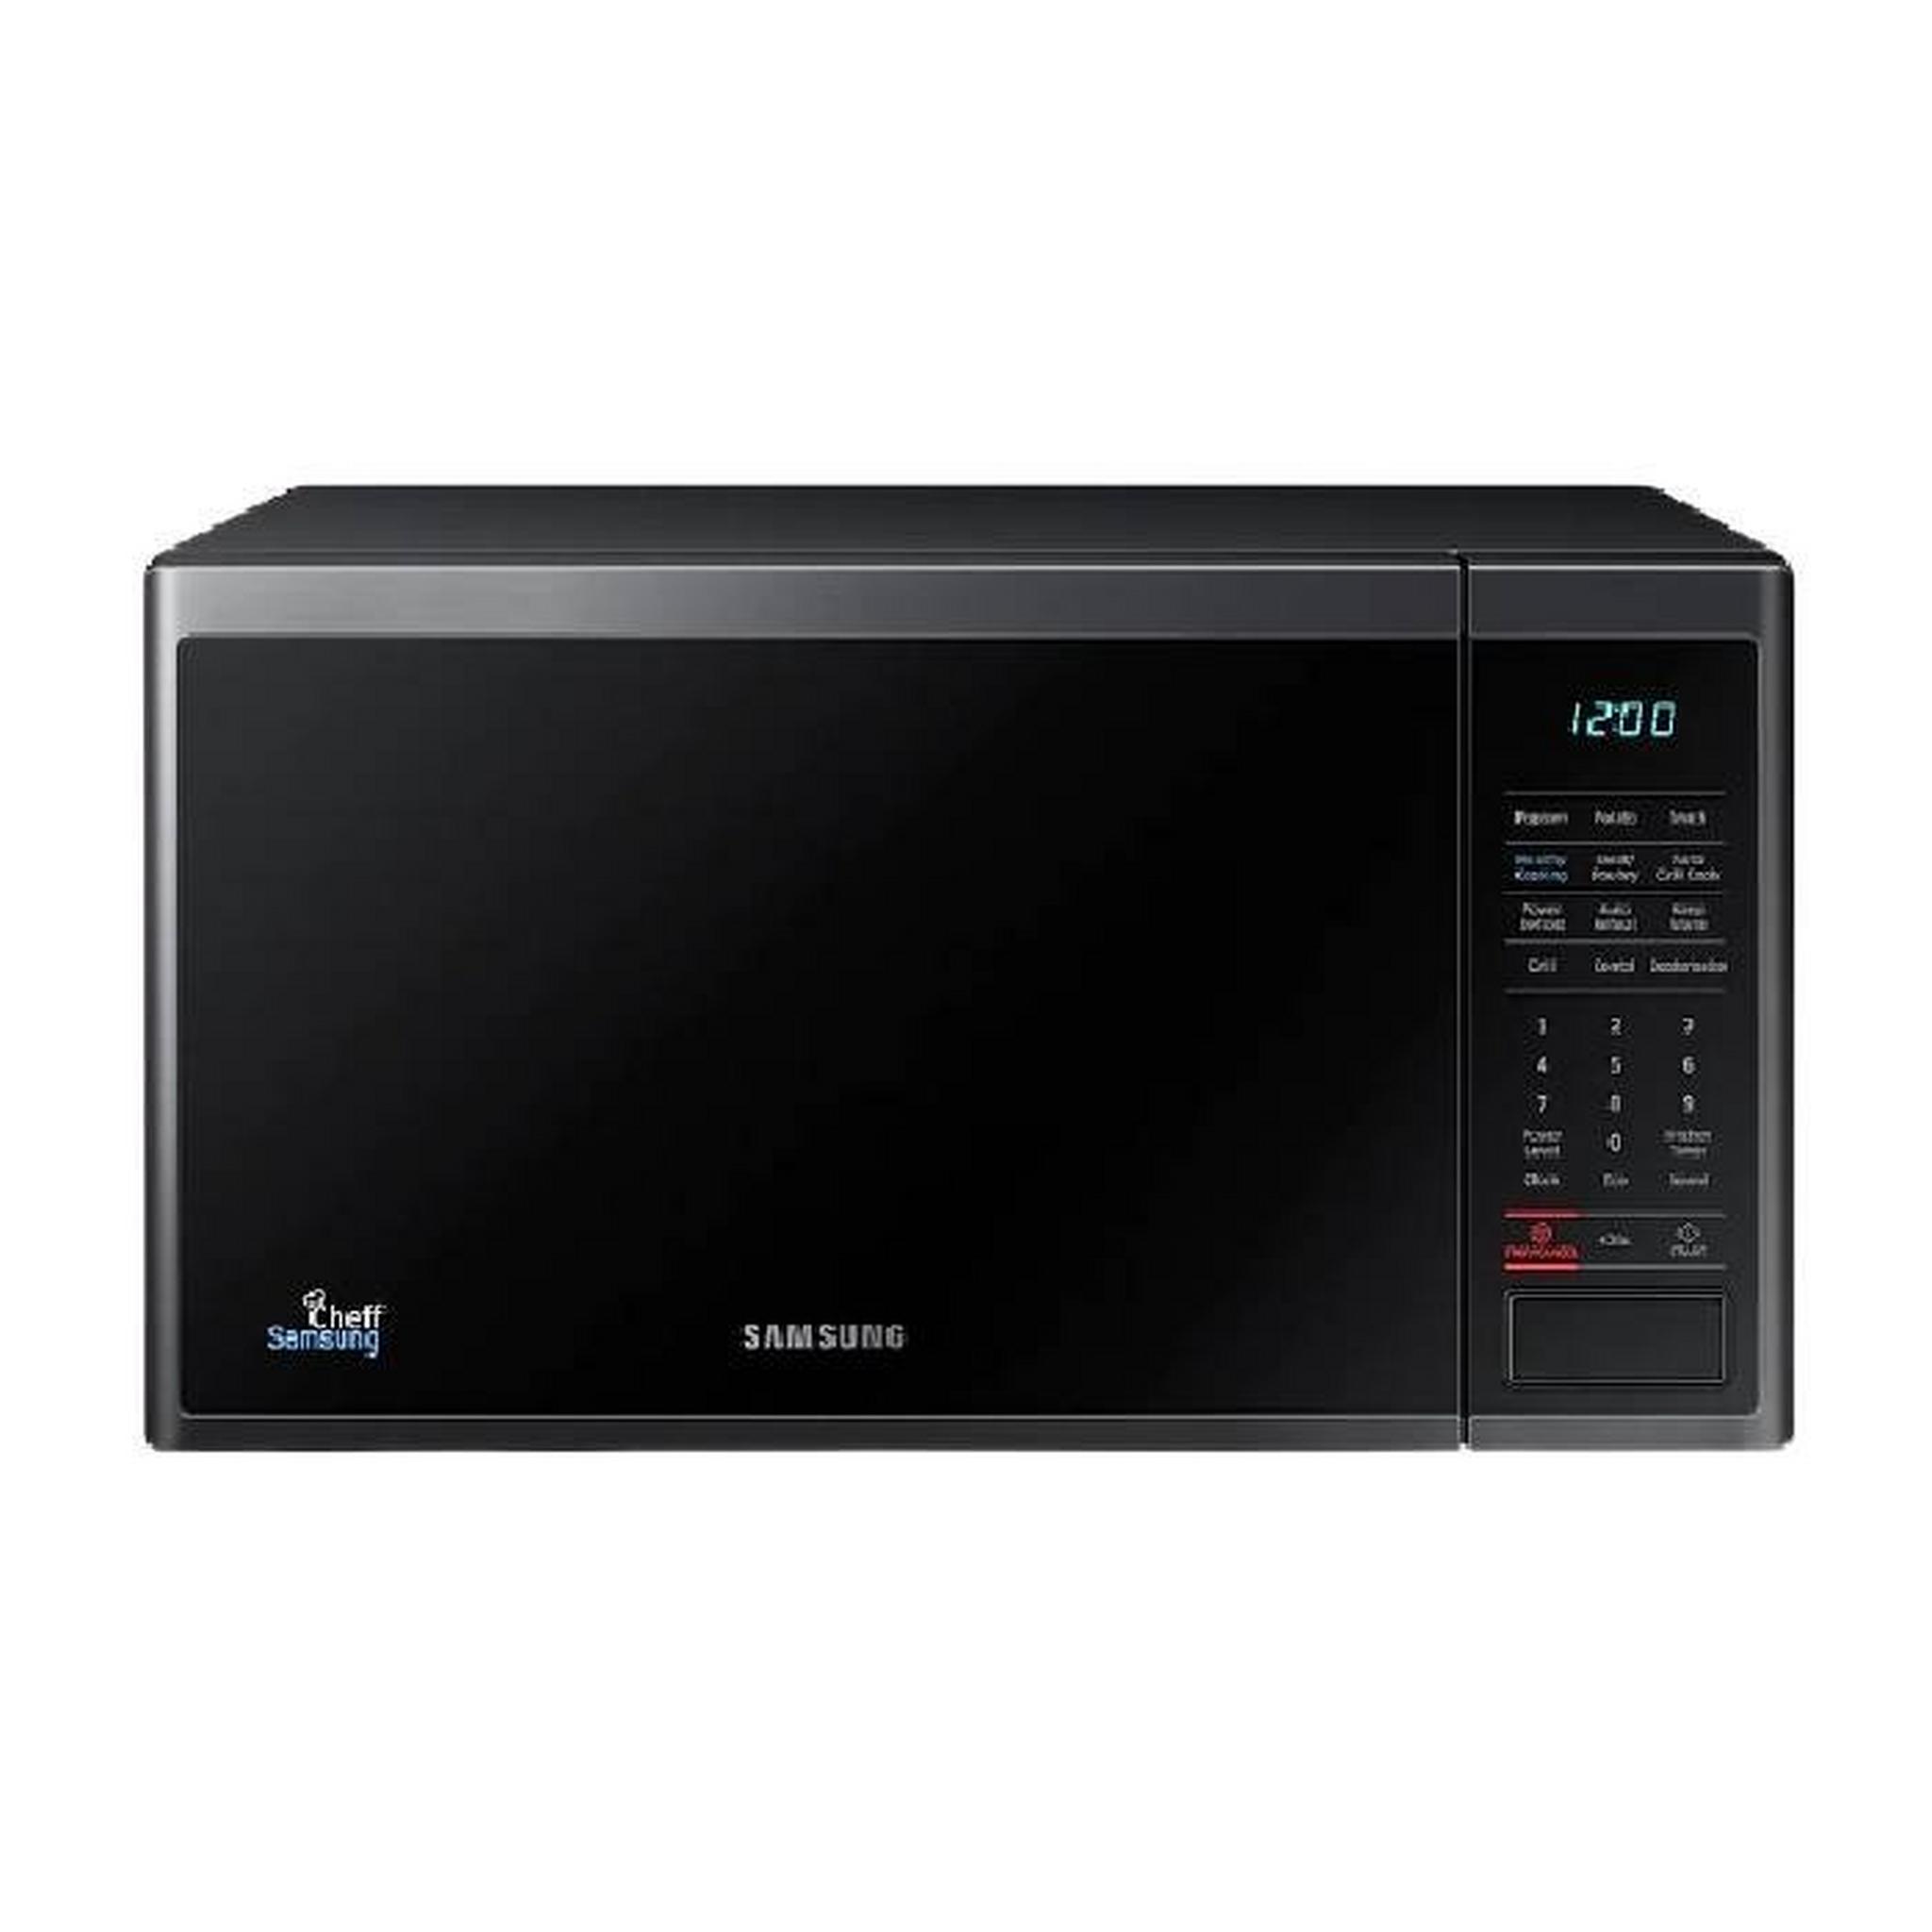 Samsung 32L Solo Microwave Oven 1000W - (MS32J5133AG)